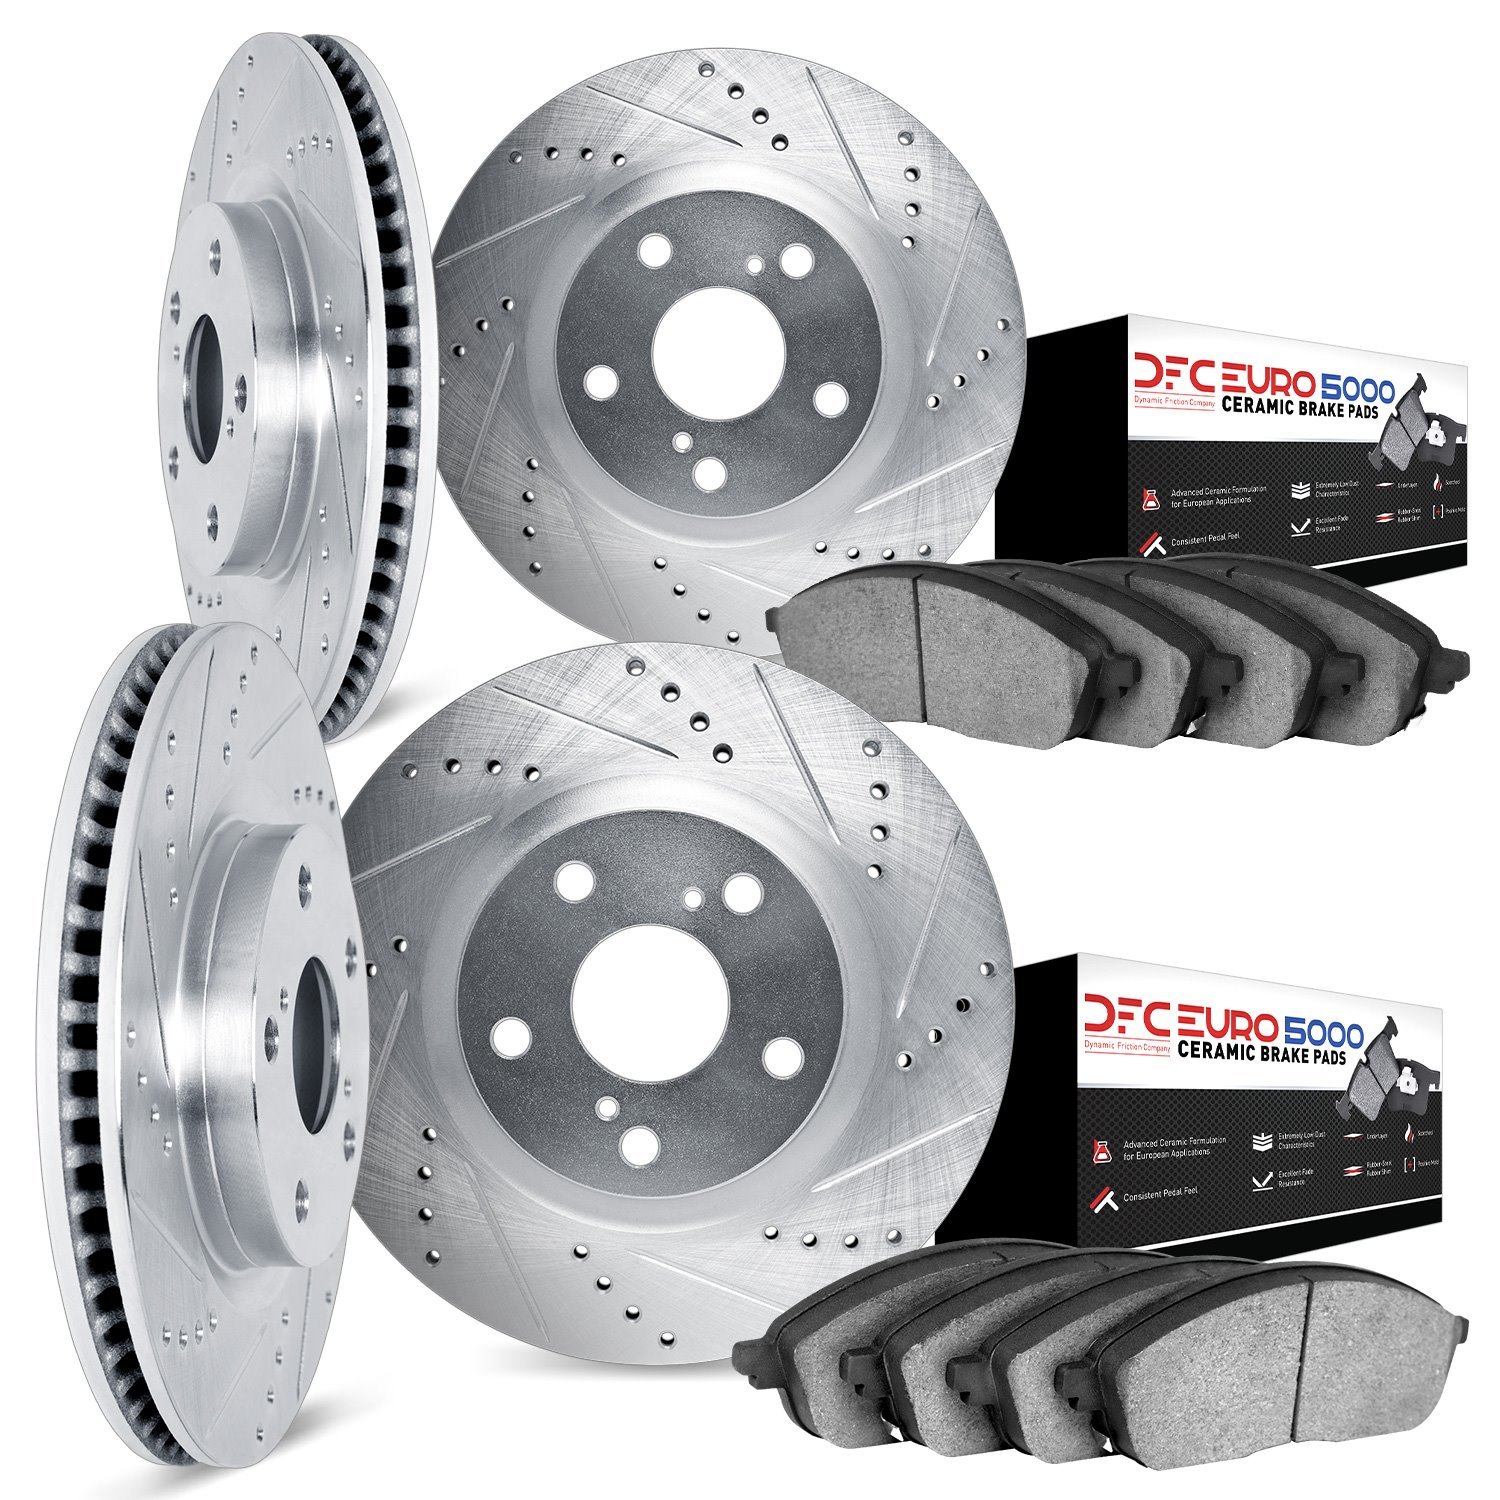 7604-20005 Drilled/Slotted Brake Rotors w/5000 Euro Ceramic Brake Pads Kit [Silver], 2014-2021 Jaguar, Position: Front and Rear